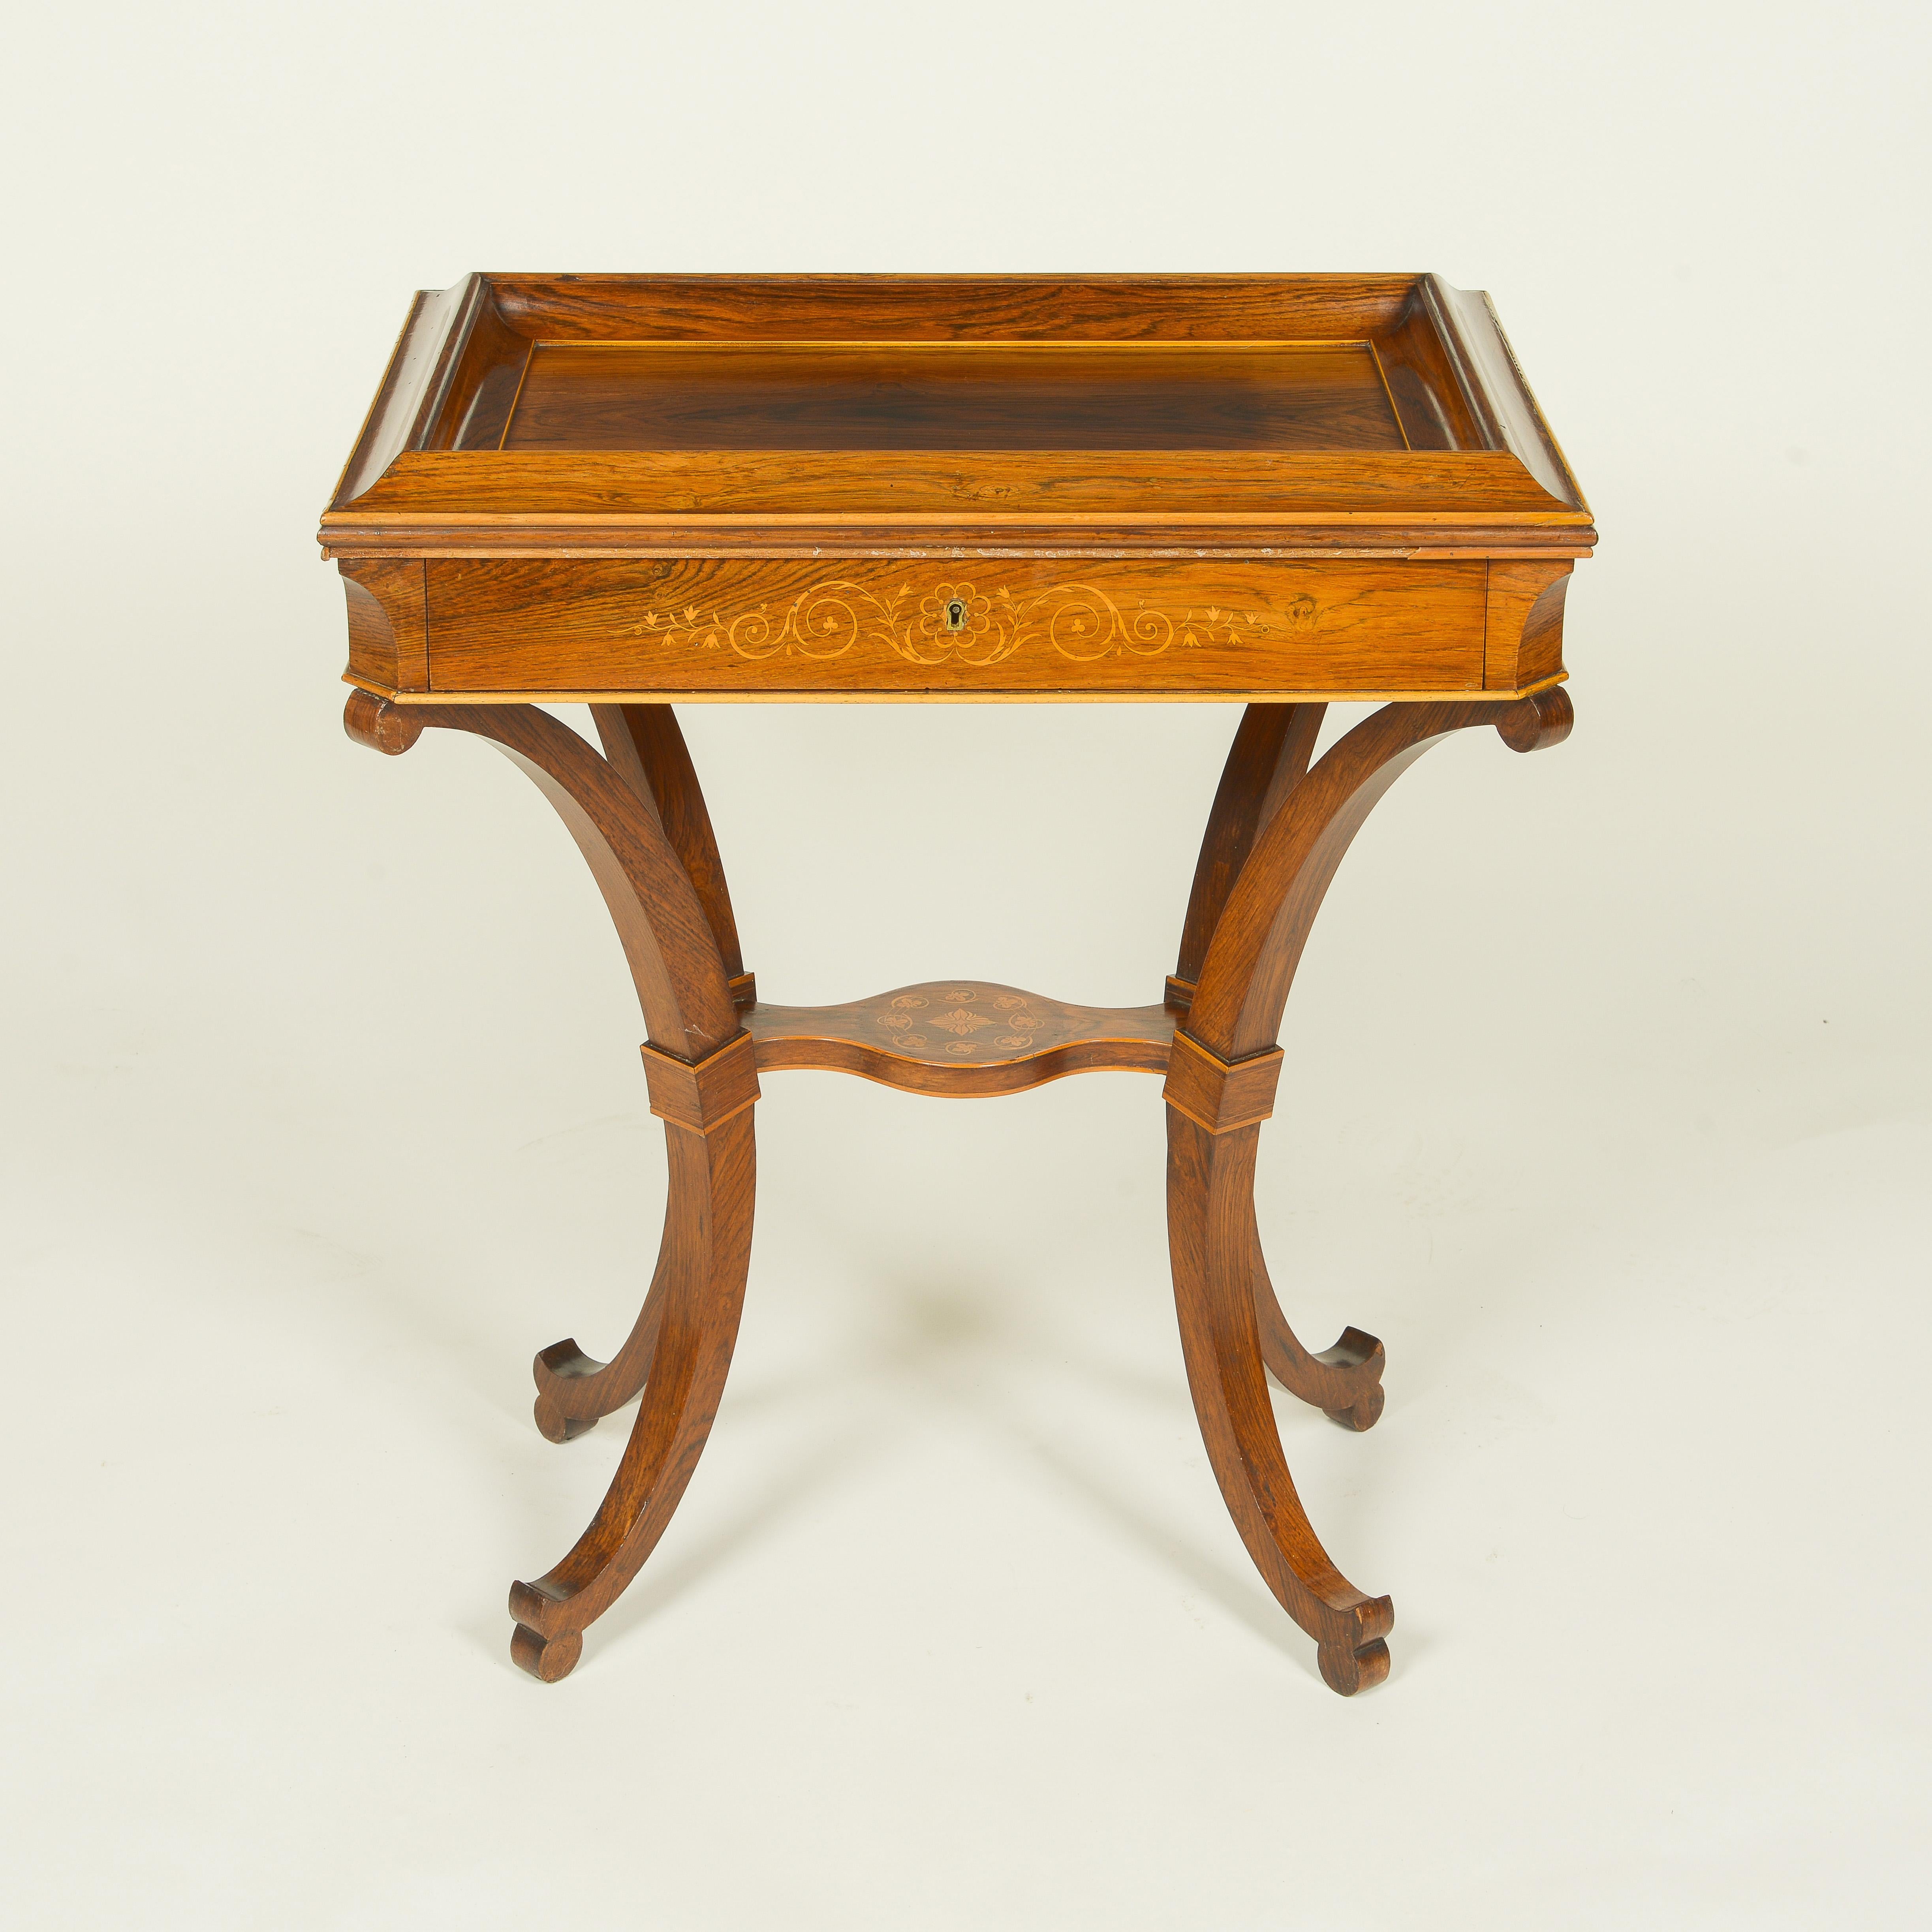 Mid-19th Century Biedermeier Inlaid Rosewood and Fruitwood Work Table For Sale